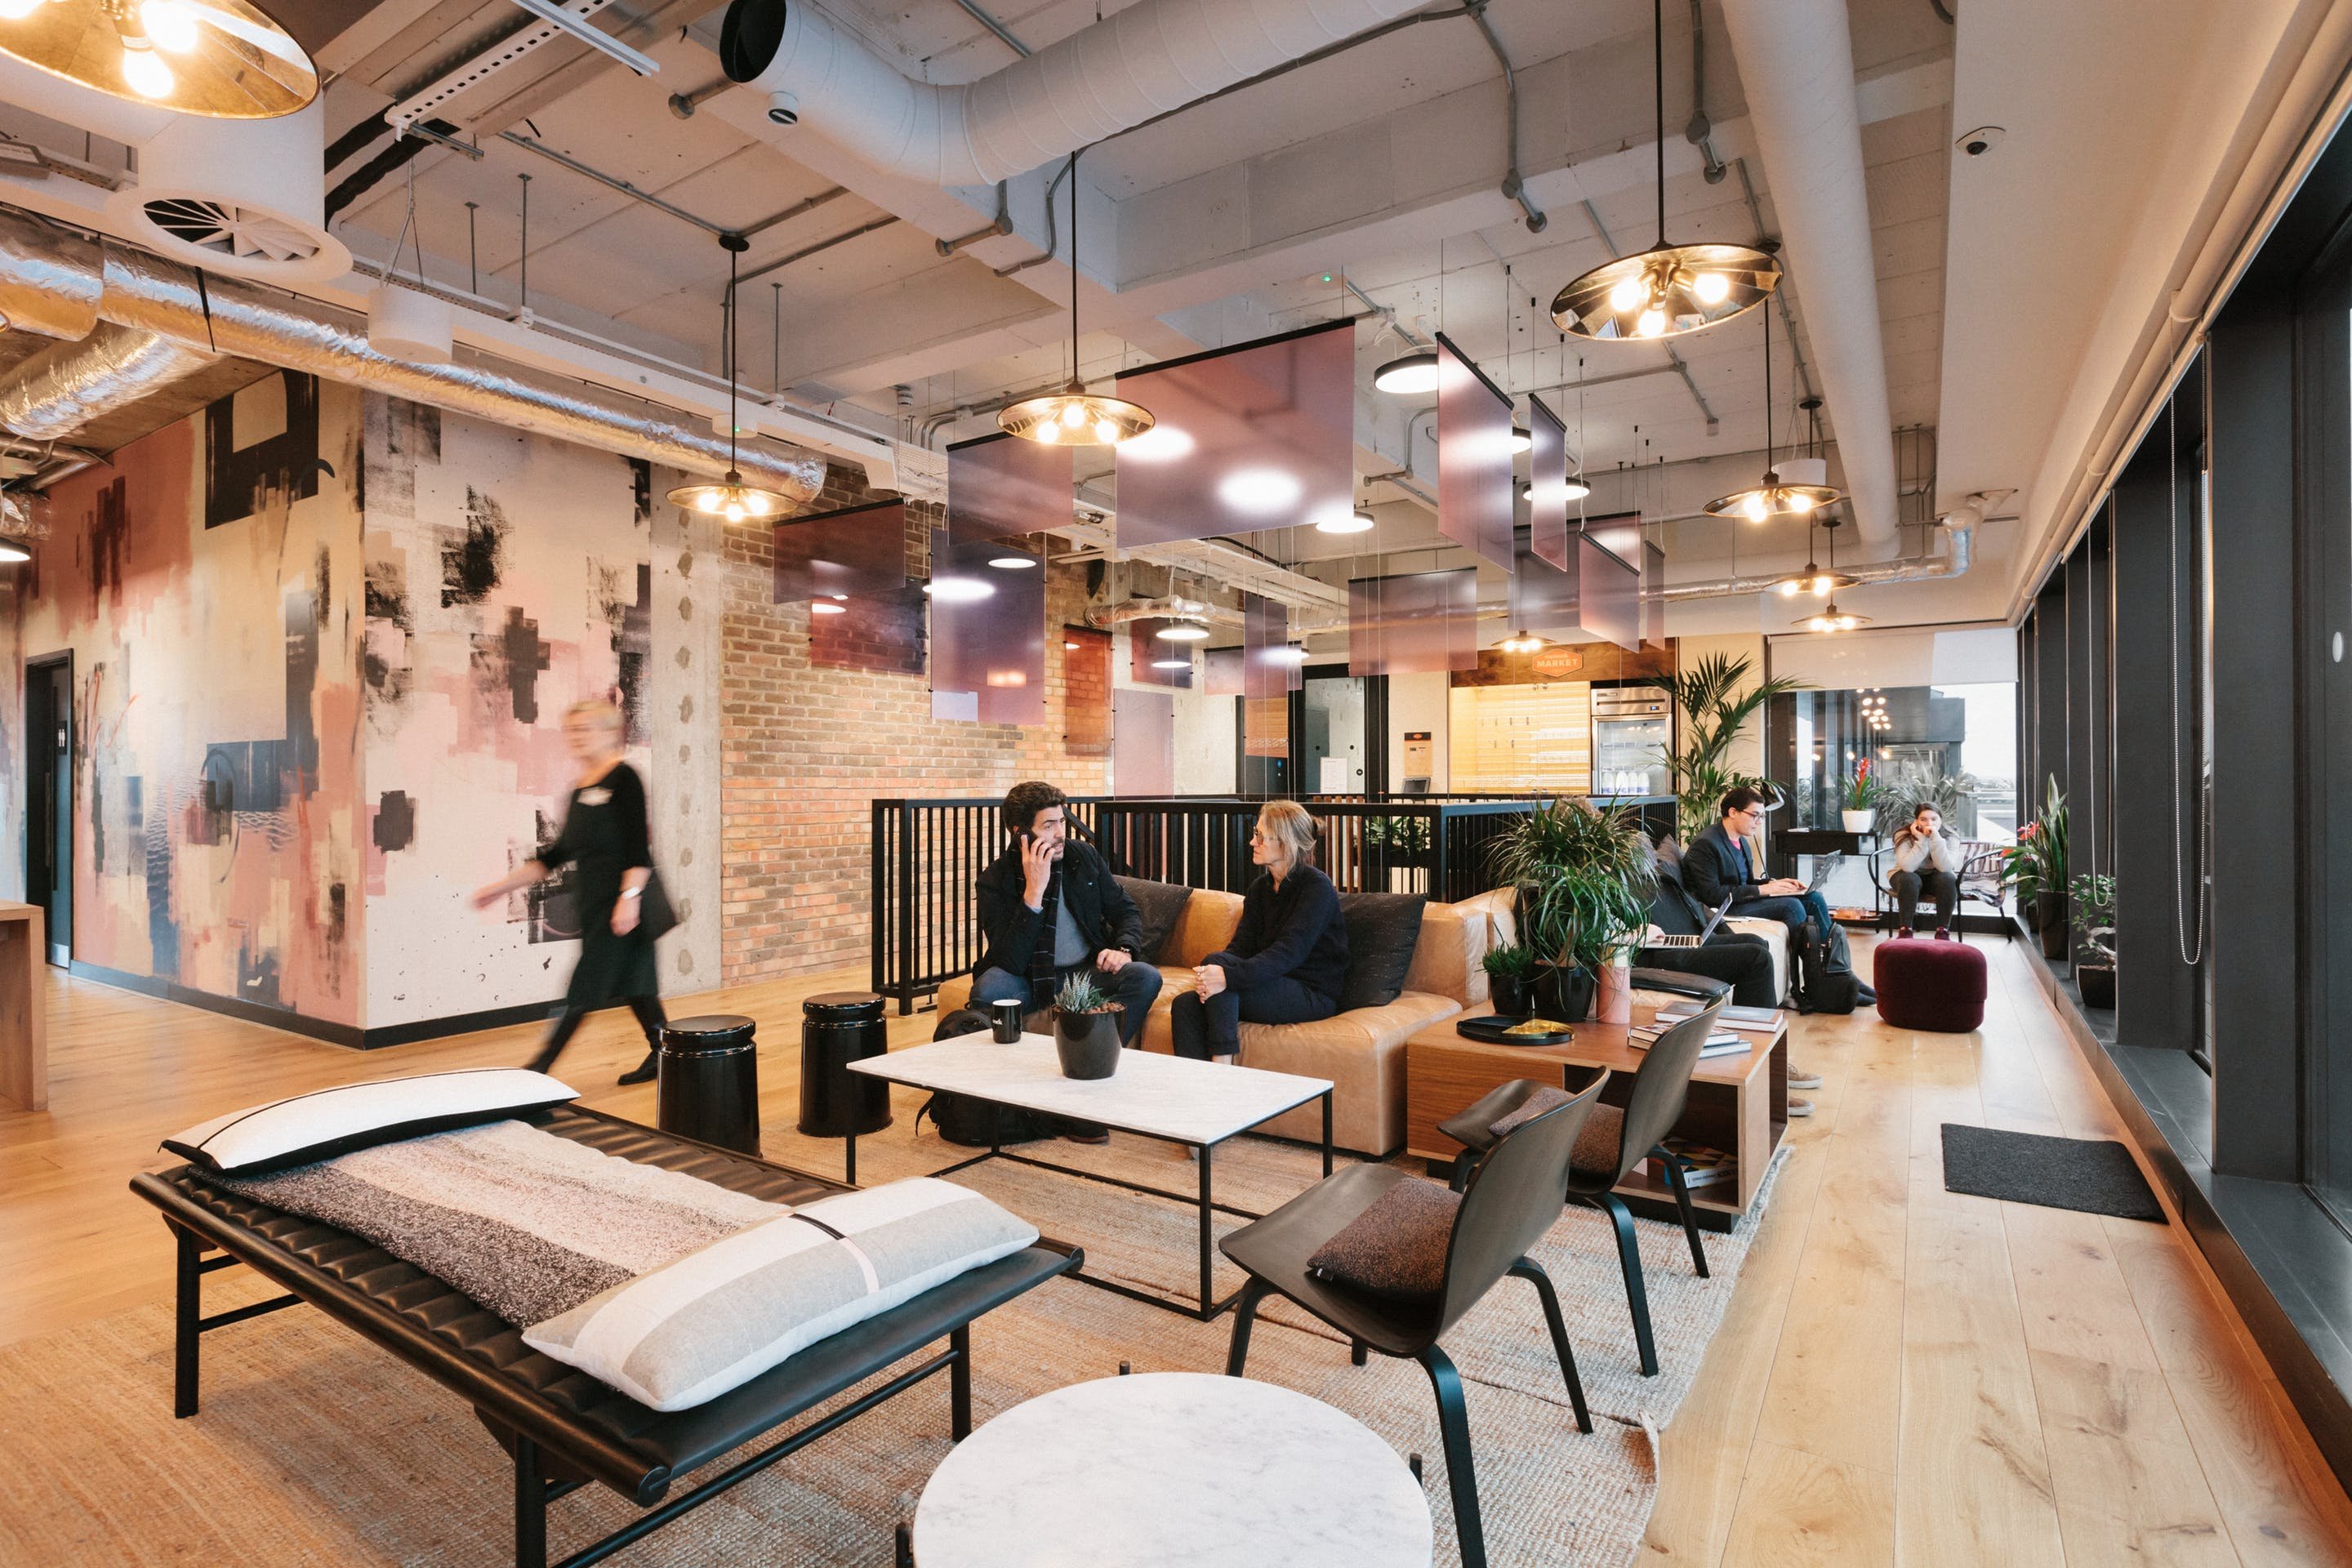 The Benefits of Coworking Spaces